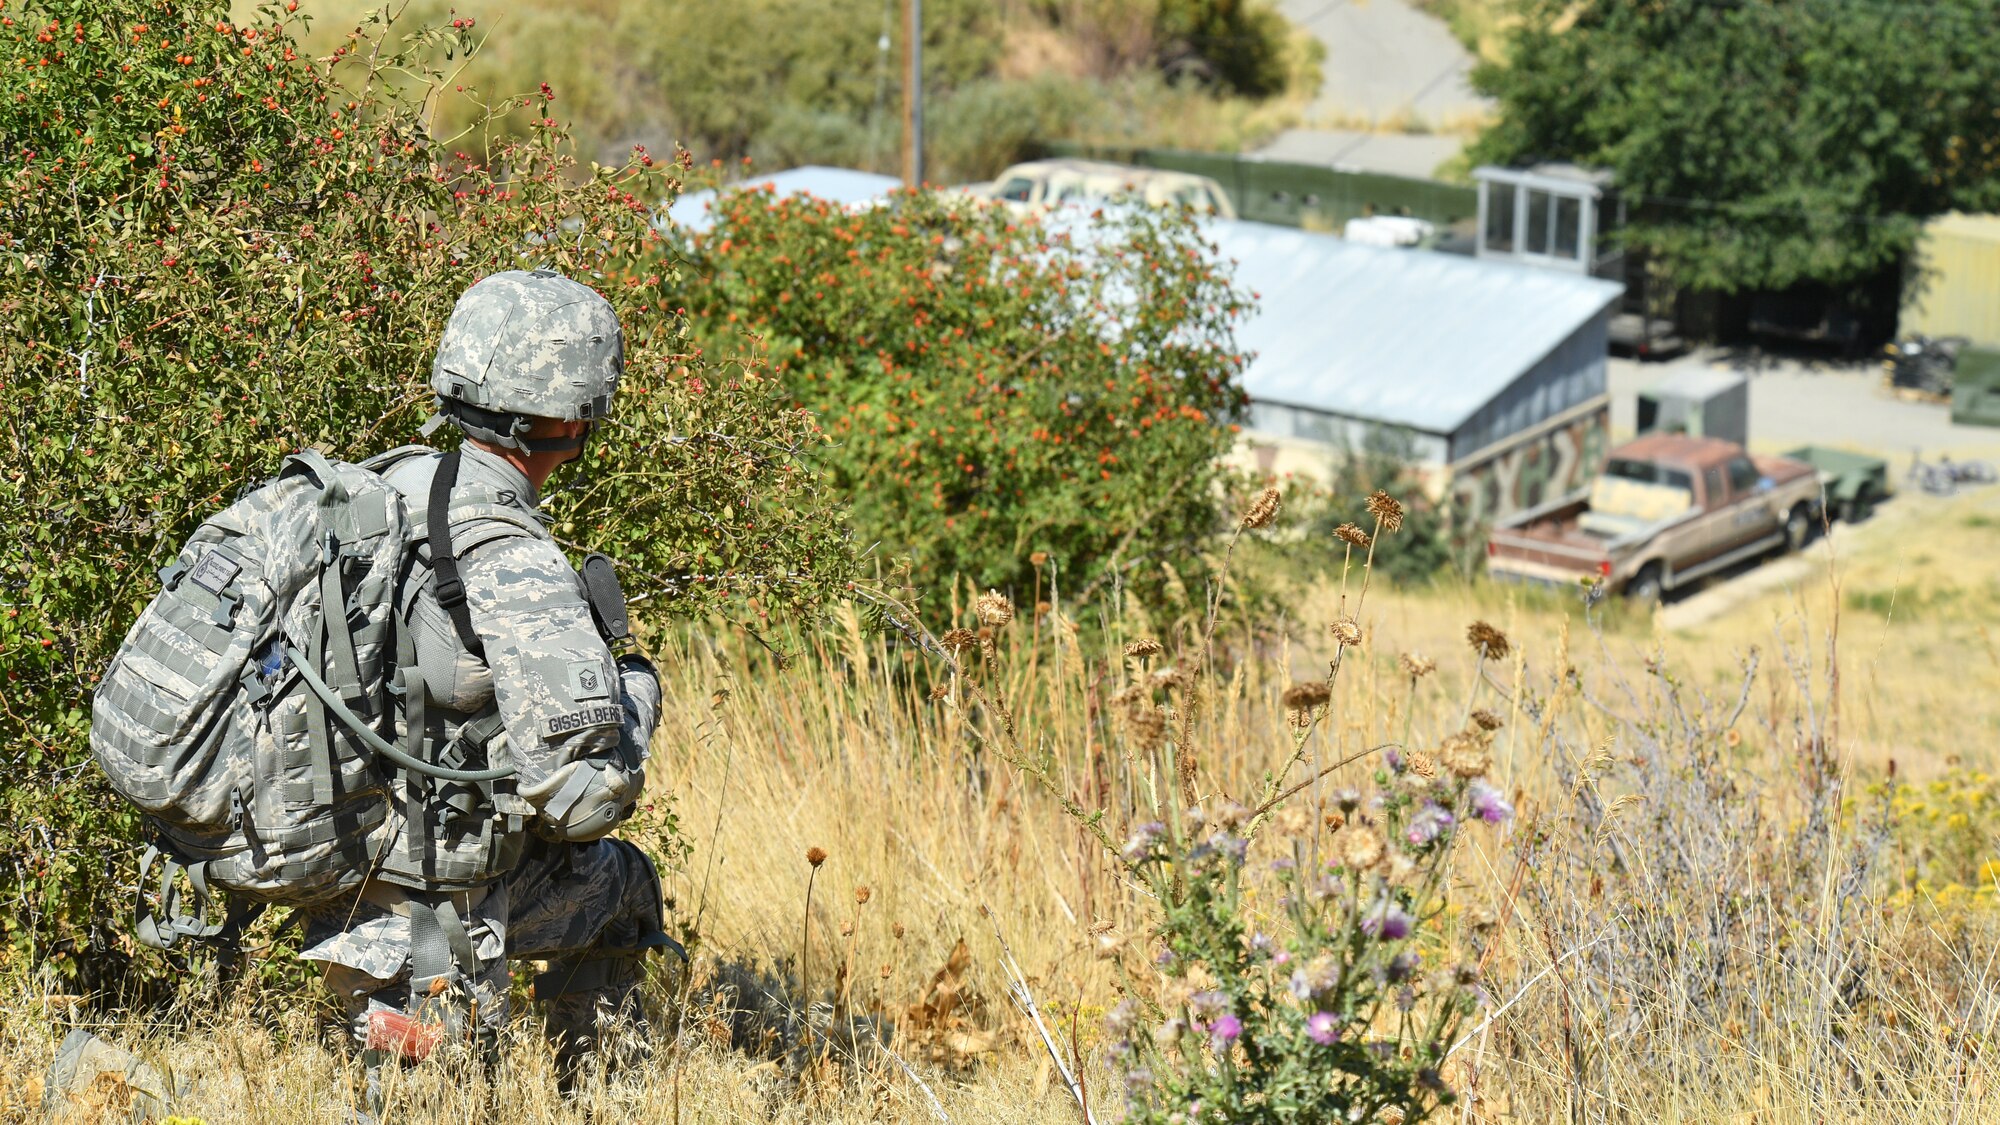 Master Sgt. Leif Gisselberg, a security forces defender from the Air Force Research Lab, Det. 15, Hawaii, overlooks a mock village during a training patrol Sept. 7, 2018, at Hill Air Force Base, Utah. Gisselberg was one of six Airmen selected to the security forces team representing Air Force Material Command at the 2018 Defender Challenge Sept. 10-14 at Camp Bullis Military Training Reservation, near San Antonio, Texas. The team will compete against 13 other teams from other U.S. Air Force major commands, Great Britain and Germany in the first 2018 Defender Challenge since 2004. (U.S. Air Force photo by R. Nial Bradshaw)